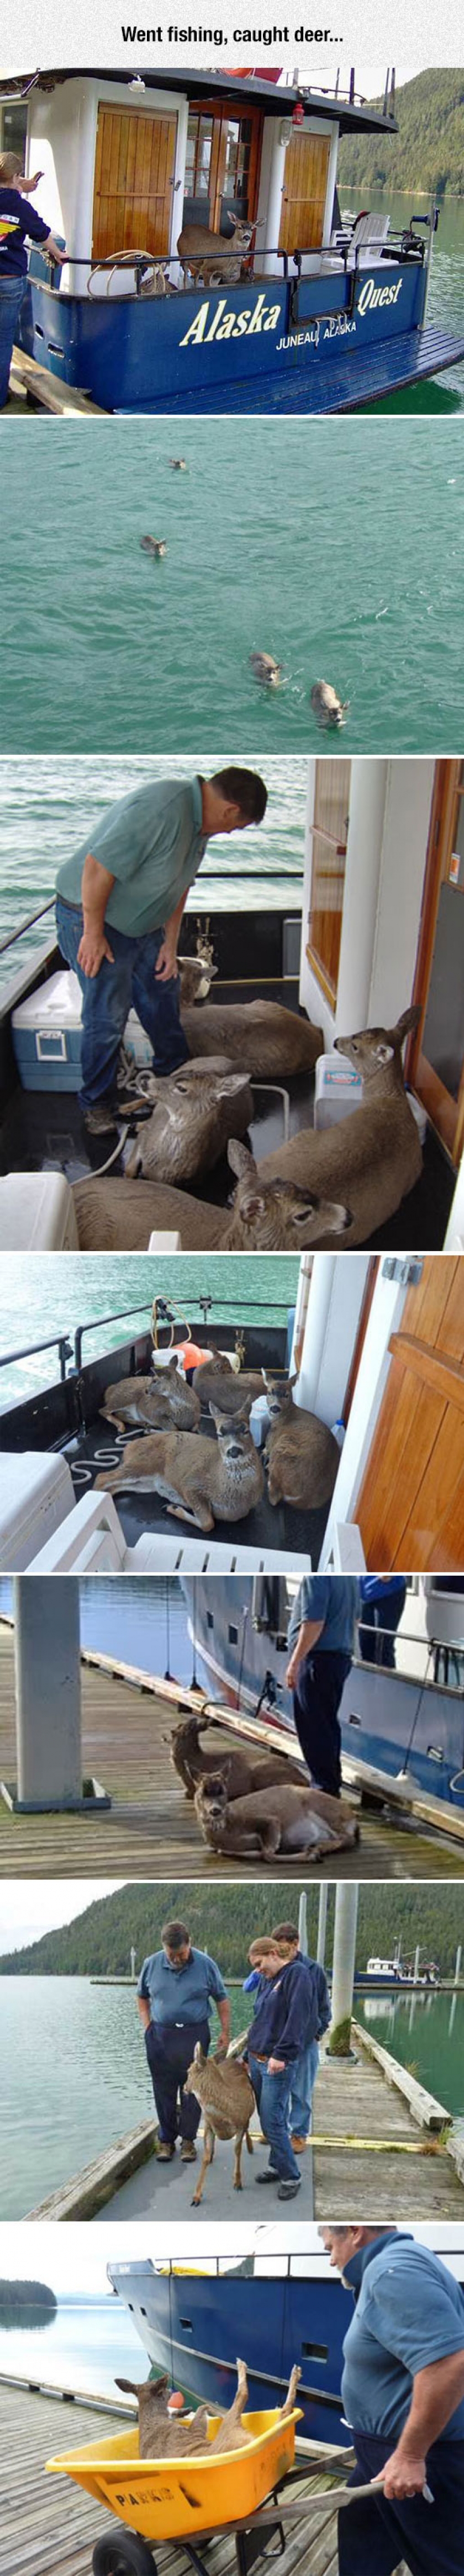 Deer Fishing Done Properly